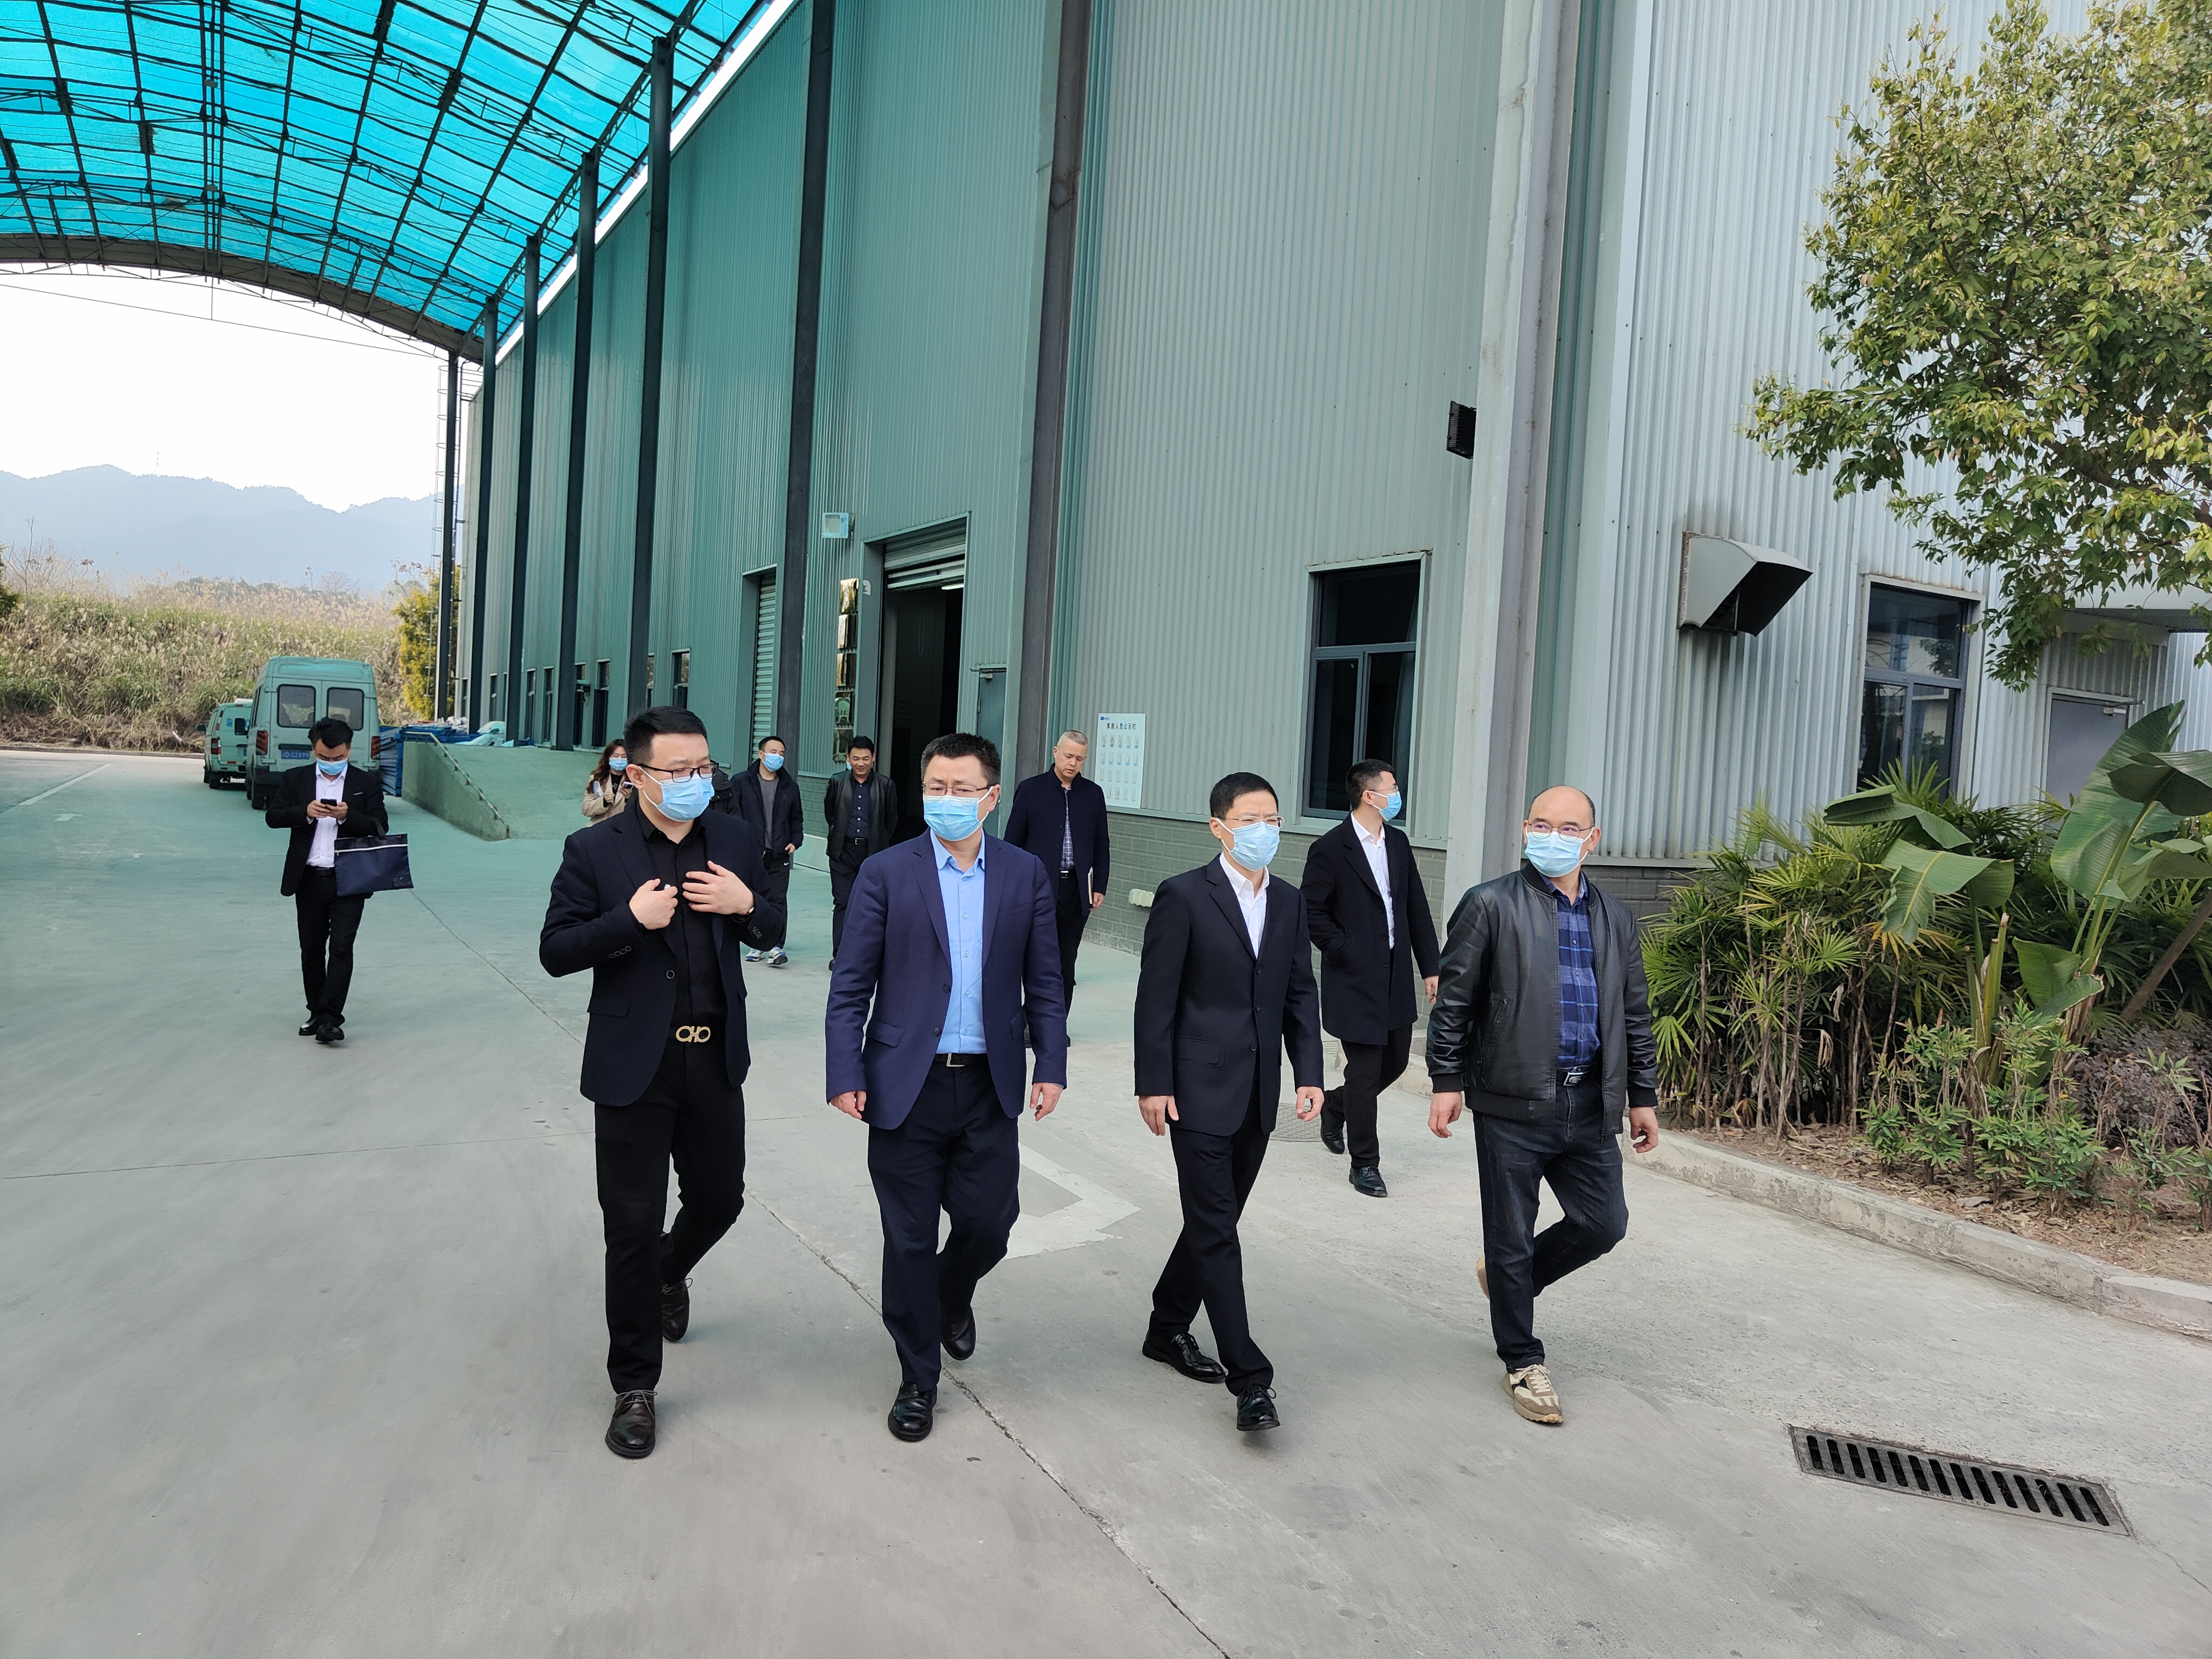 Pi Tao, Deputy Director of the Management Committee of Liangjiang New Area, and his delegation visited and guided Hemony